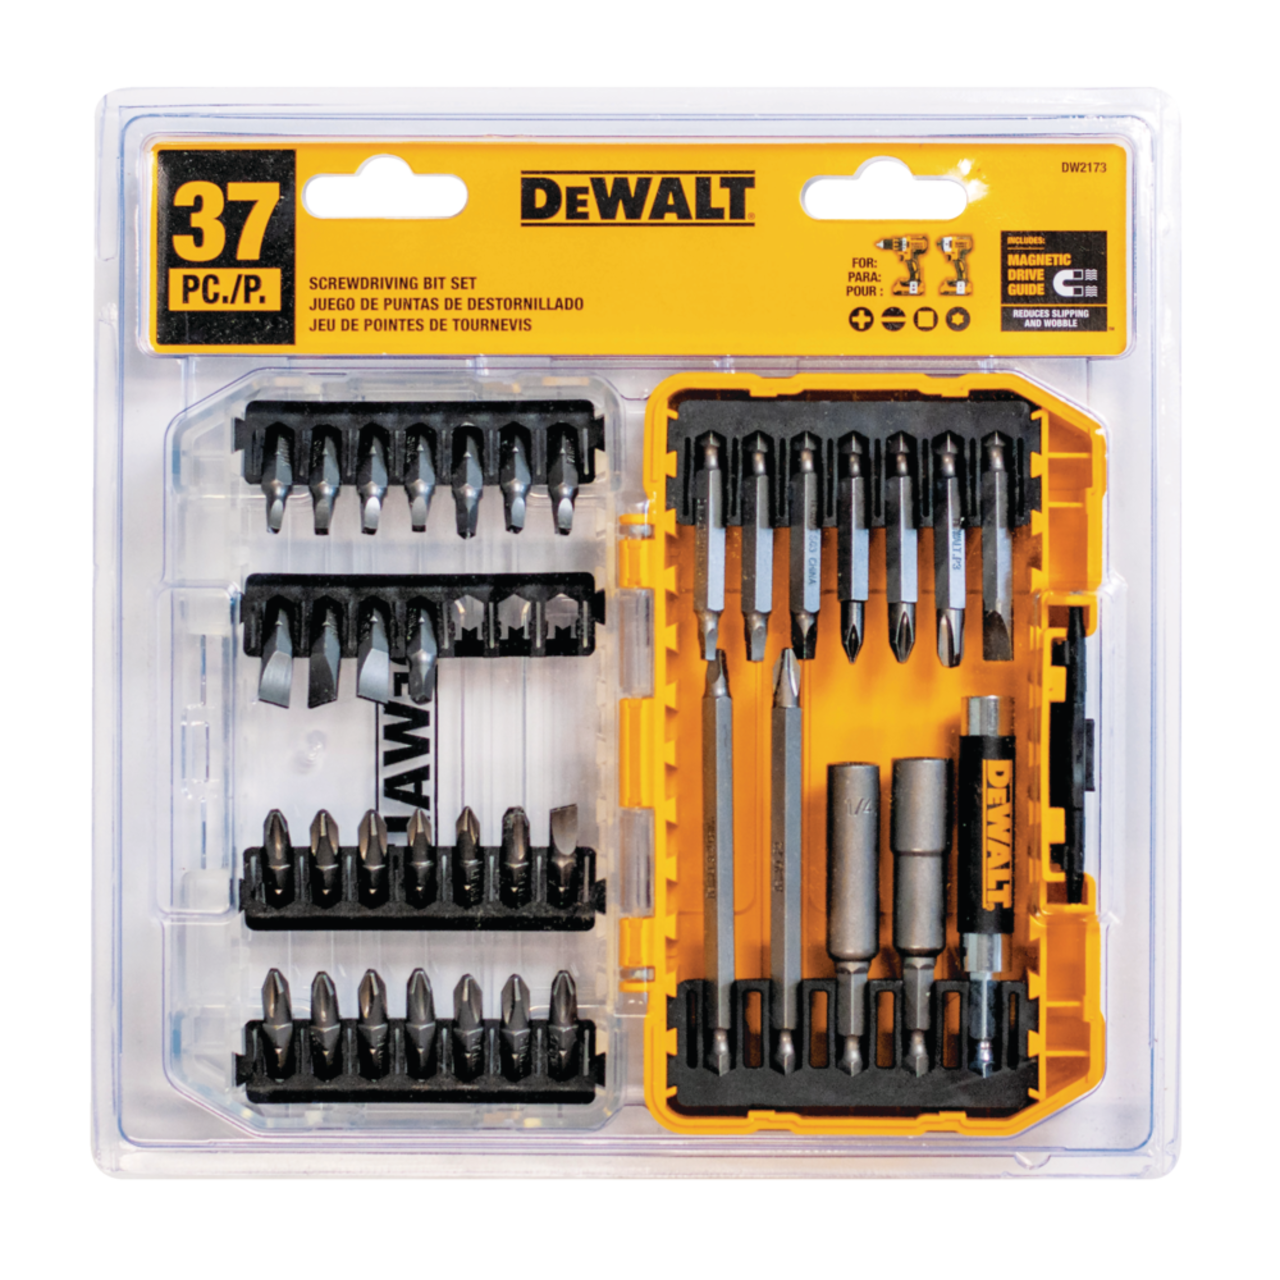 https://media-www.canadiantire.ca/product/fixing/tools/power-tool-accessories/0543581/dewalt-37pc-screwdriver-bit-set-7fd9eabd-faa1-435b-b2d6-f03d9ef135b8.png?imdensity=1&imwidth=640&impolicy=mZoom